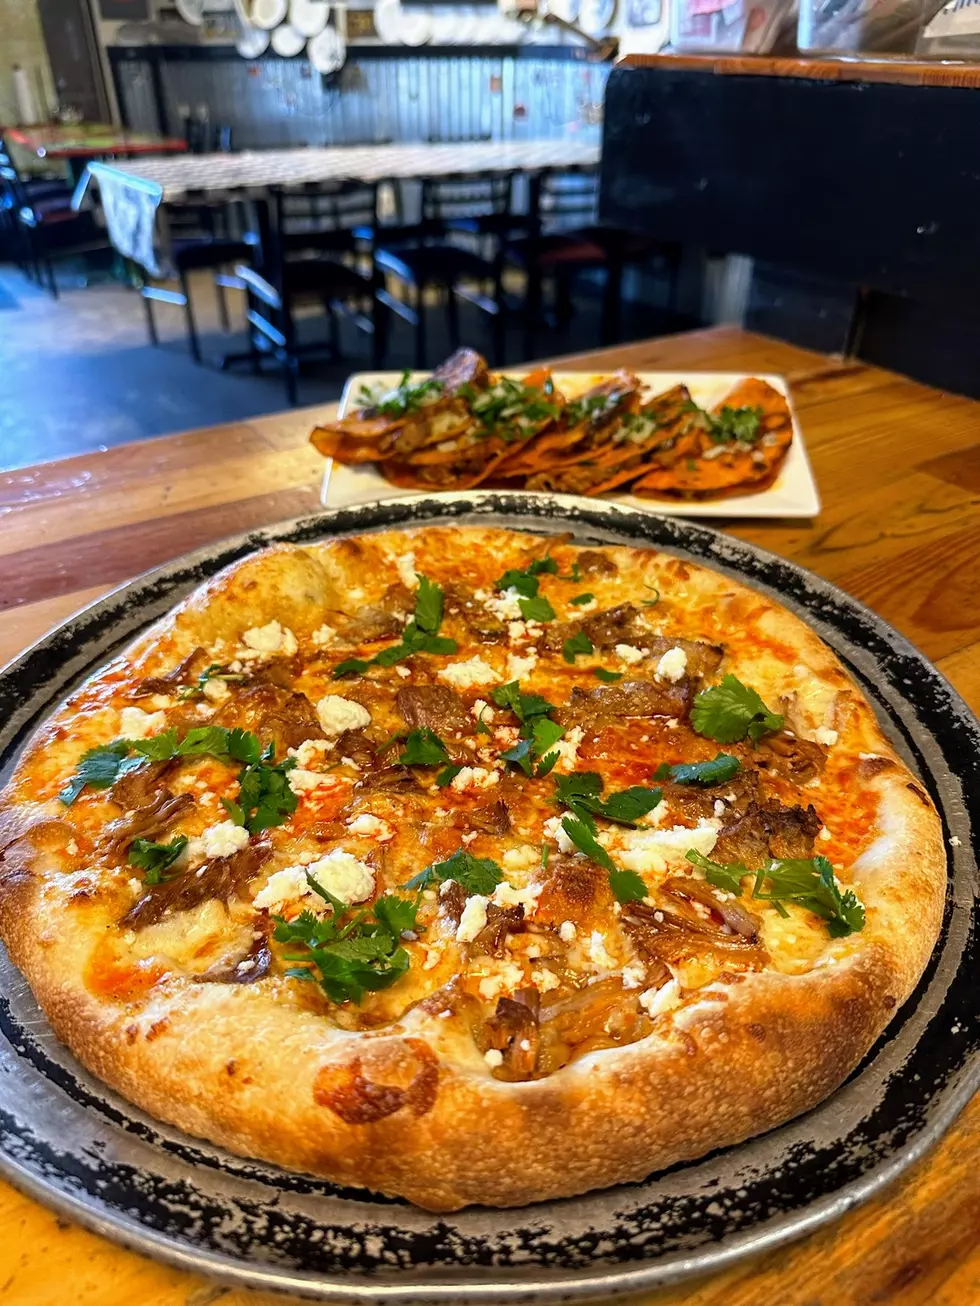 Like Birria Tacos? Check Out The New Birria Pizza At This Pizzeria In Odessa!